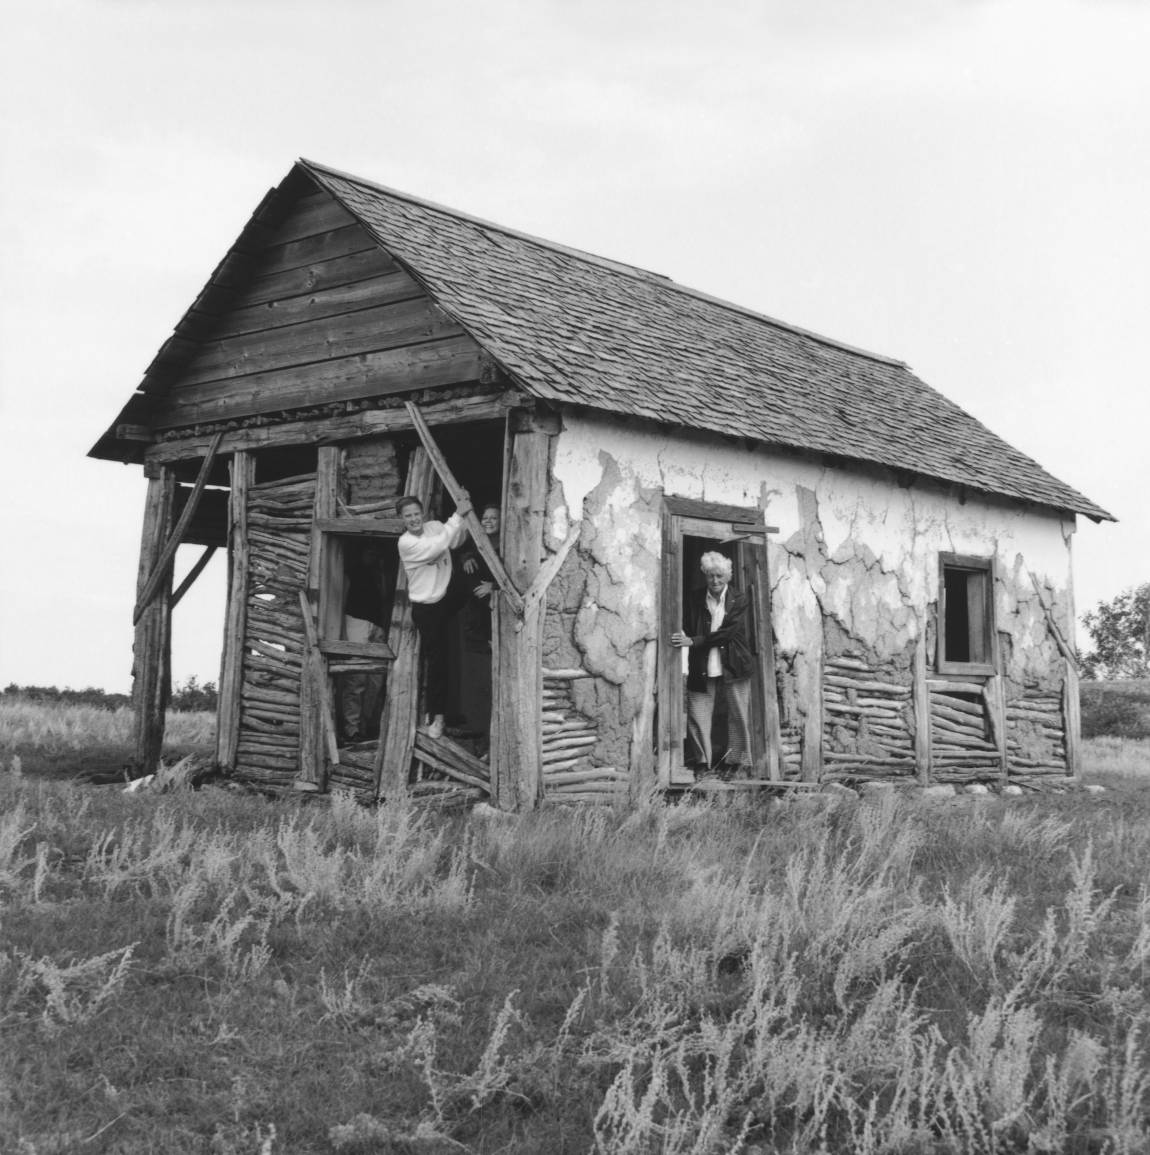 Black and white photo of elderly woman and daughter inside the elderly woman’s old farm house.